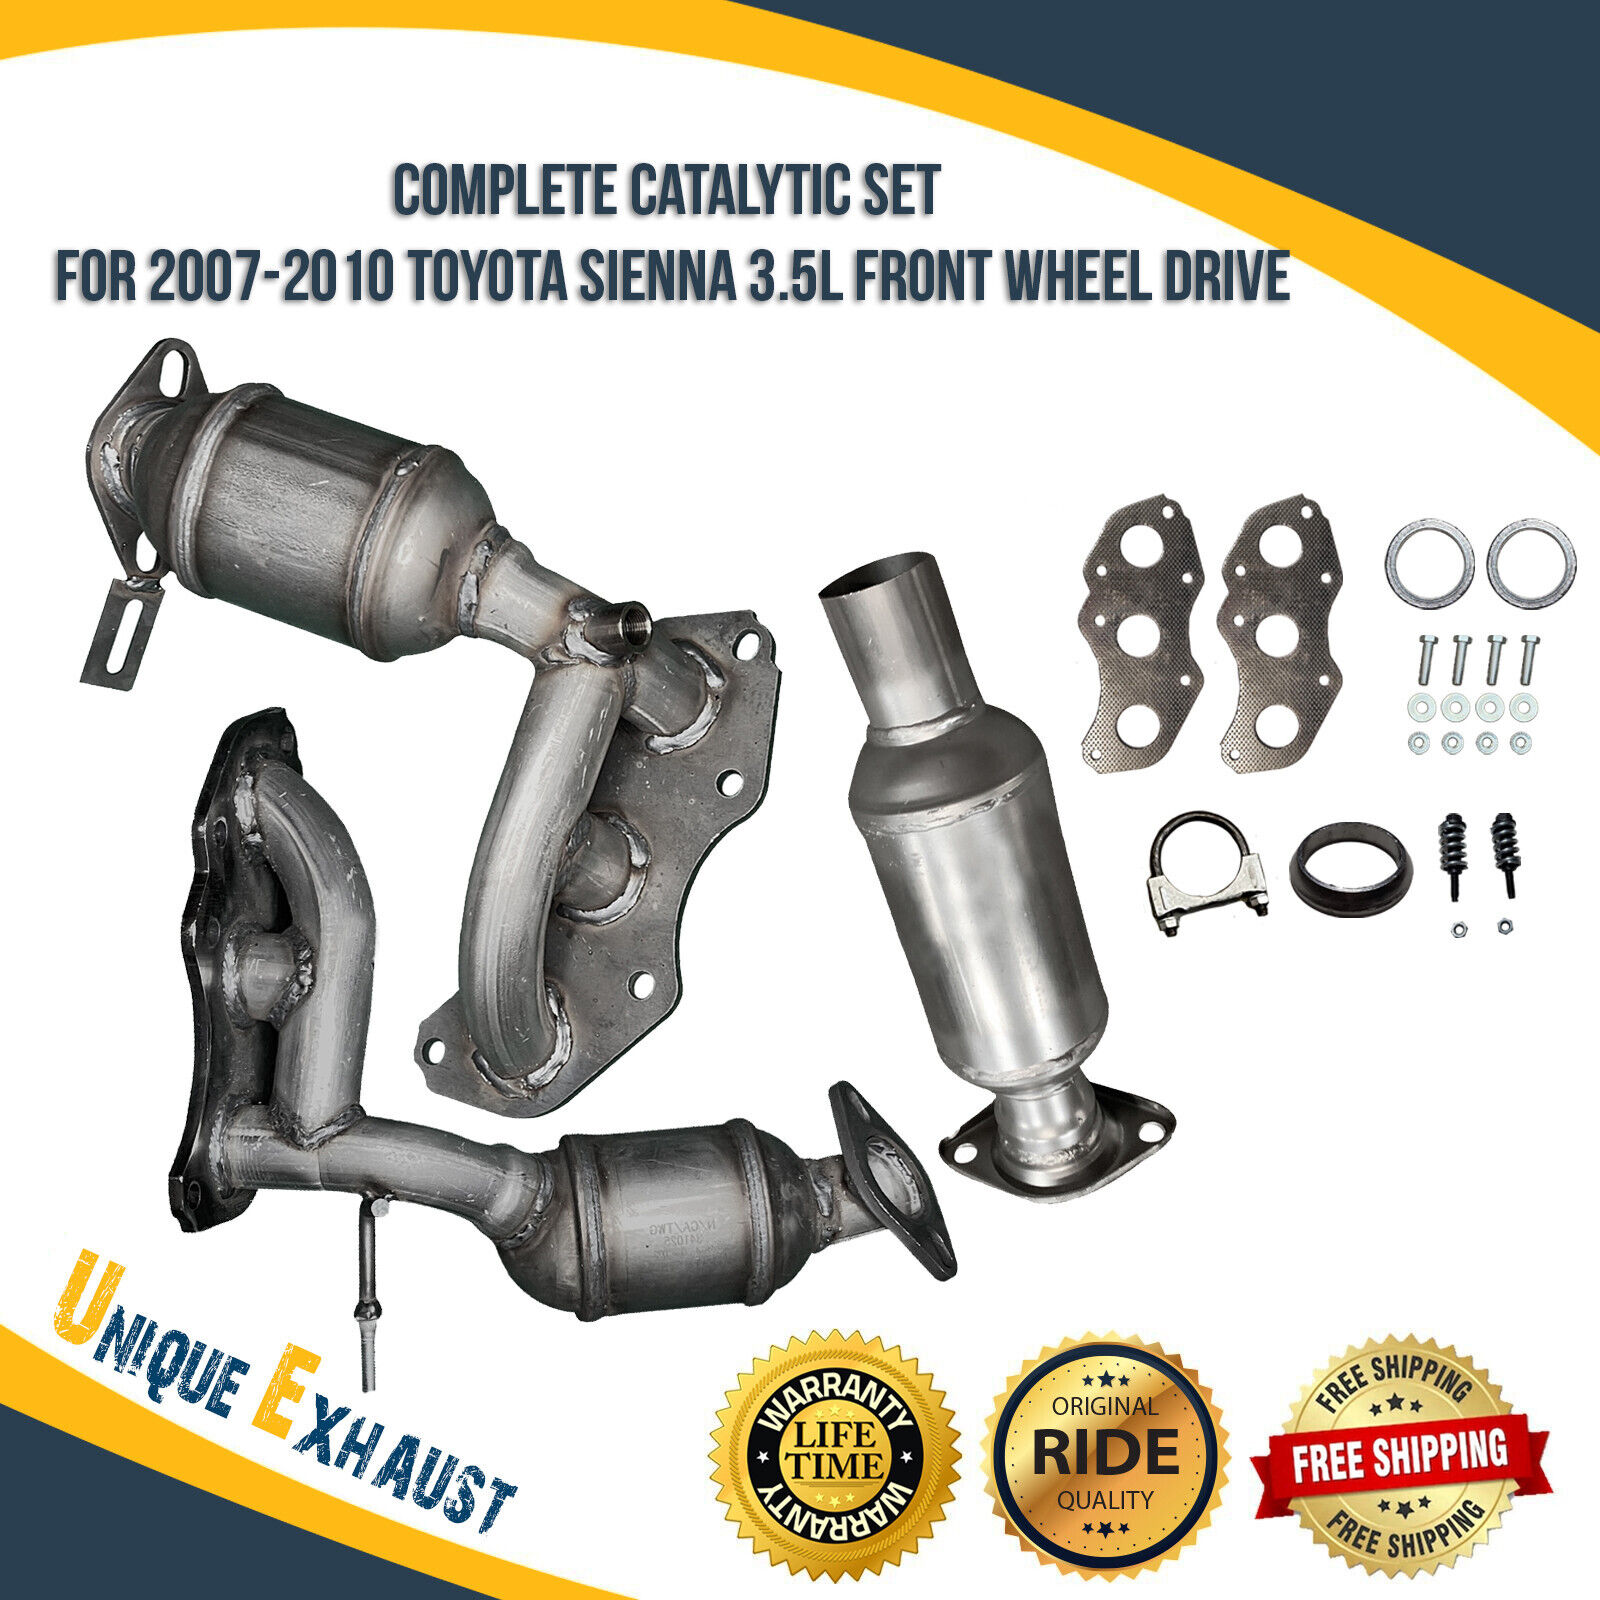 Complete Catalytic Set for 2007-2010 Toyota Sienna 3.5L FRONT WHEEL DRIVE